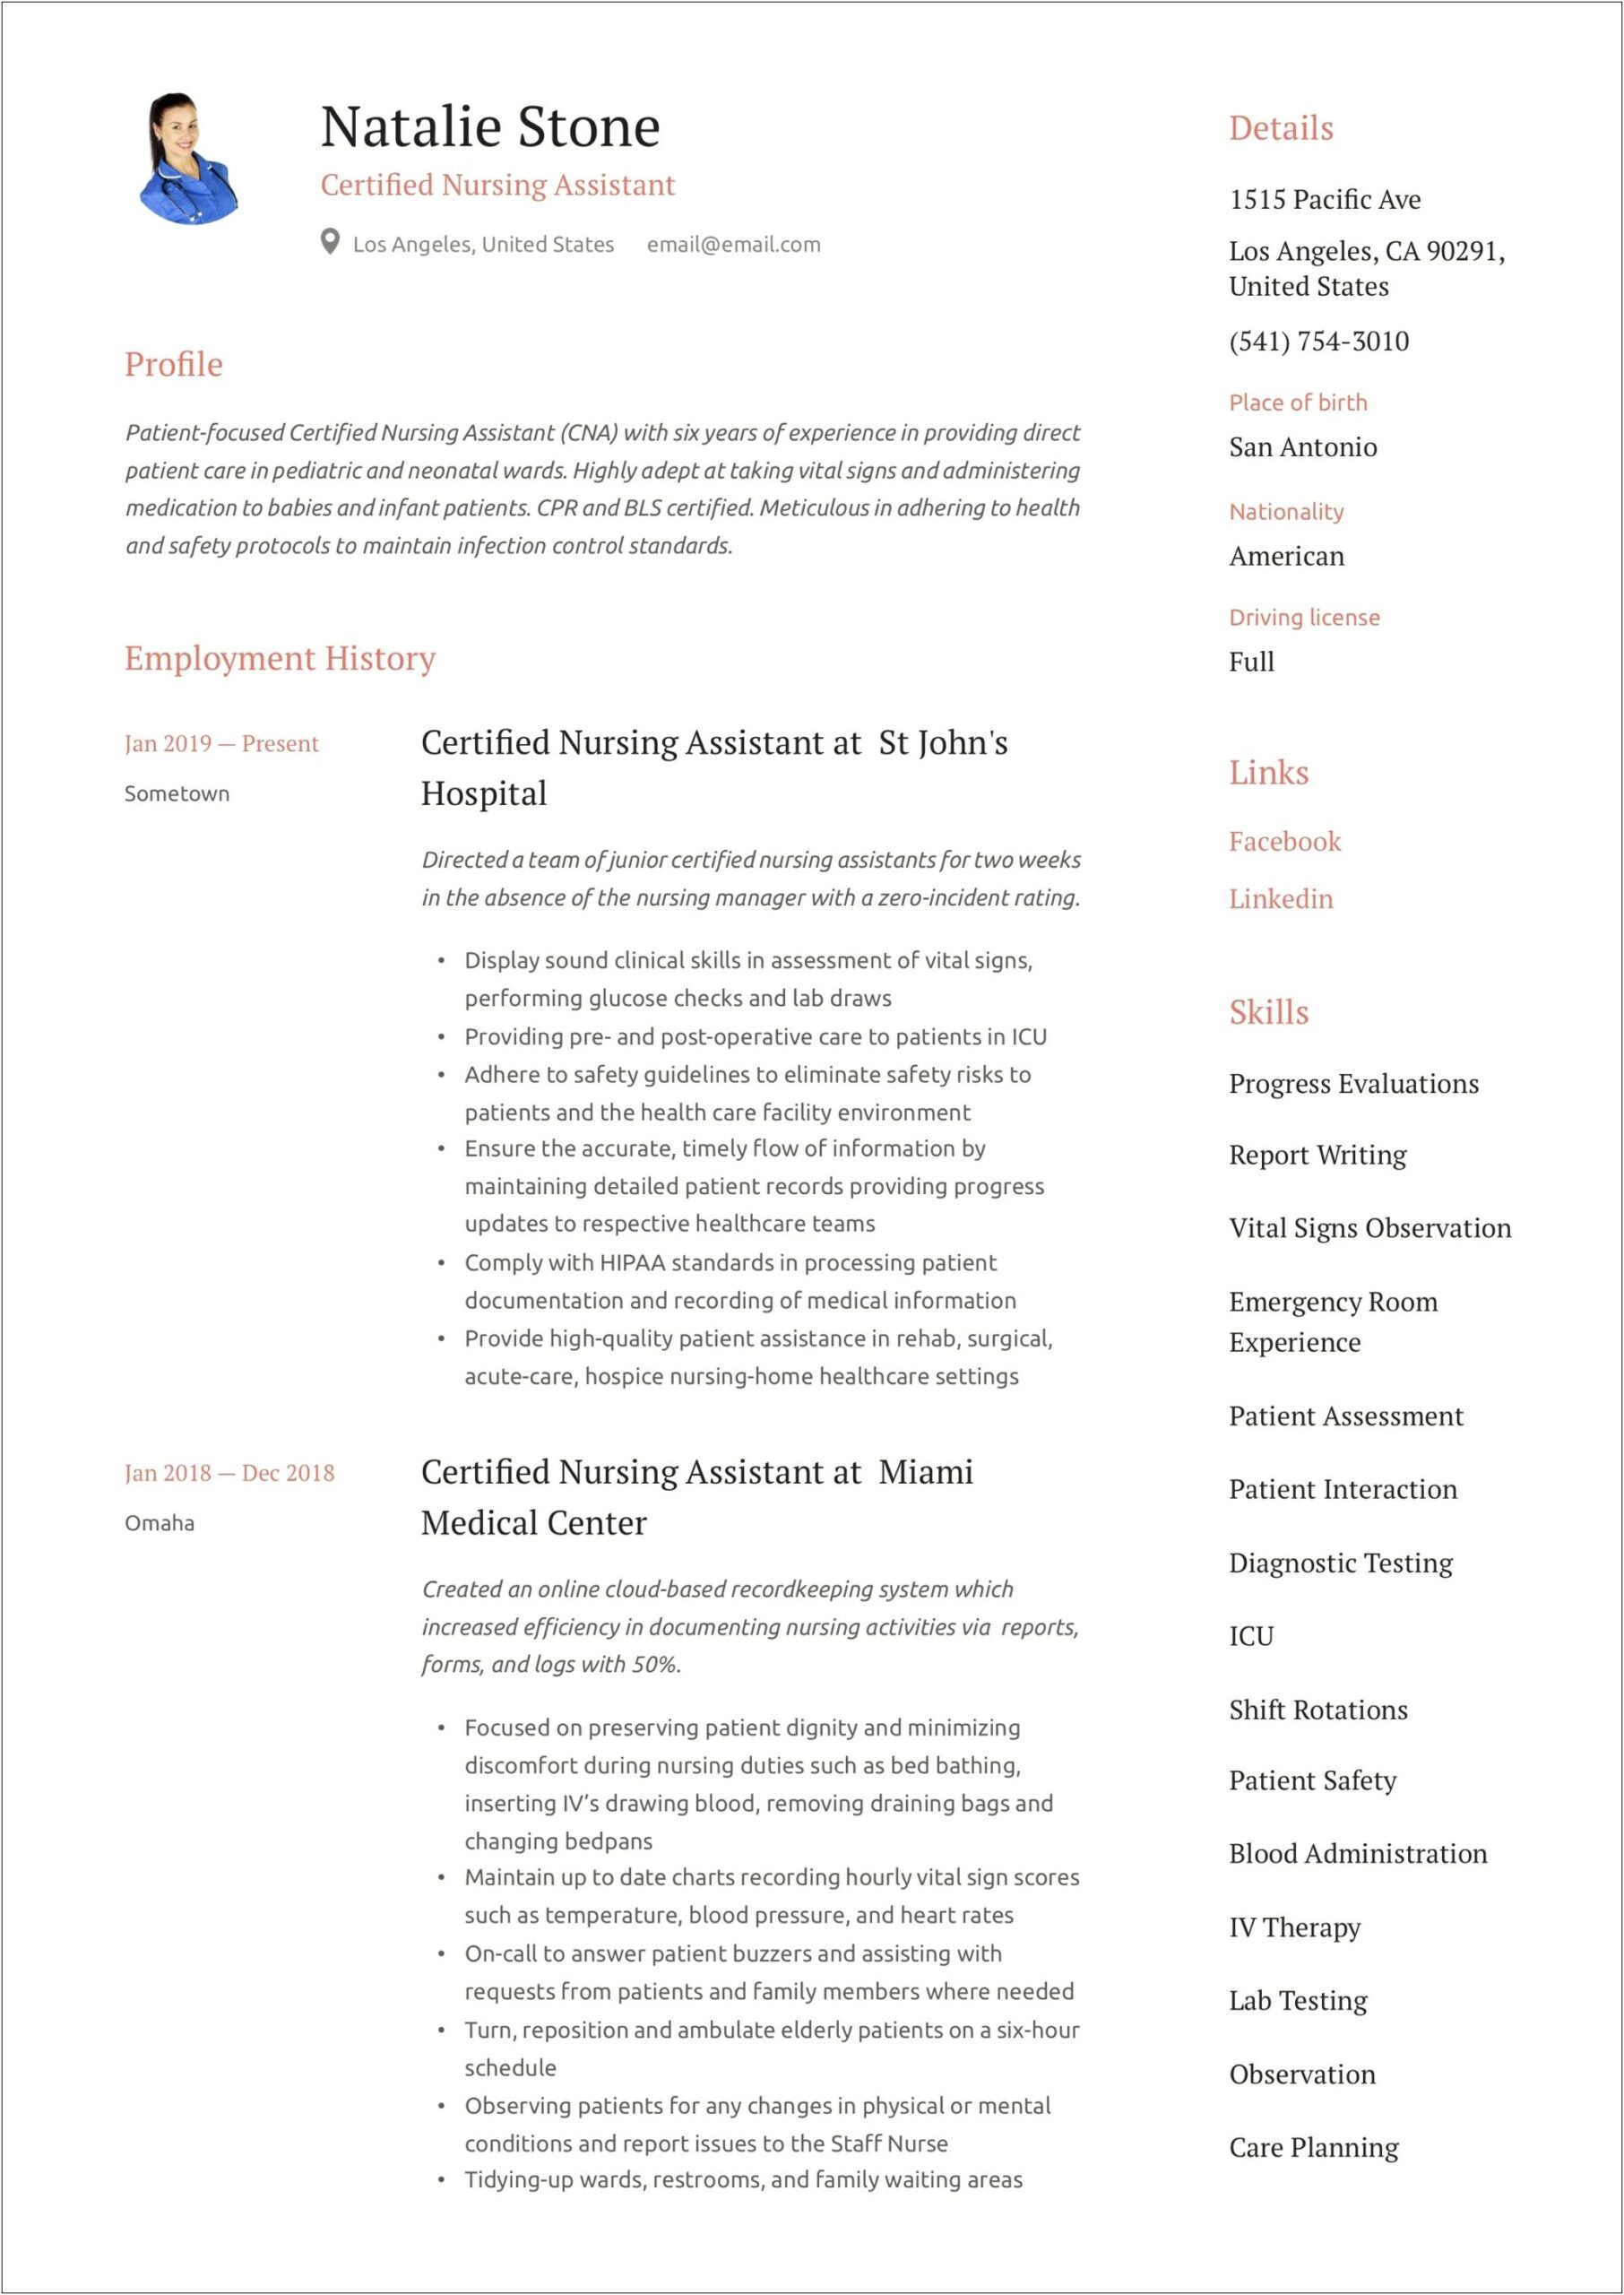 Resume Summary For Certified Nursing Assistant